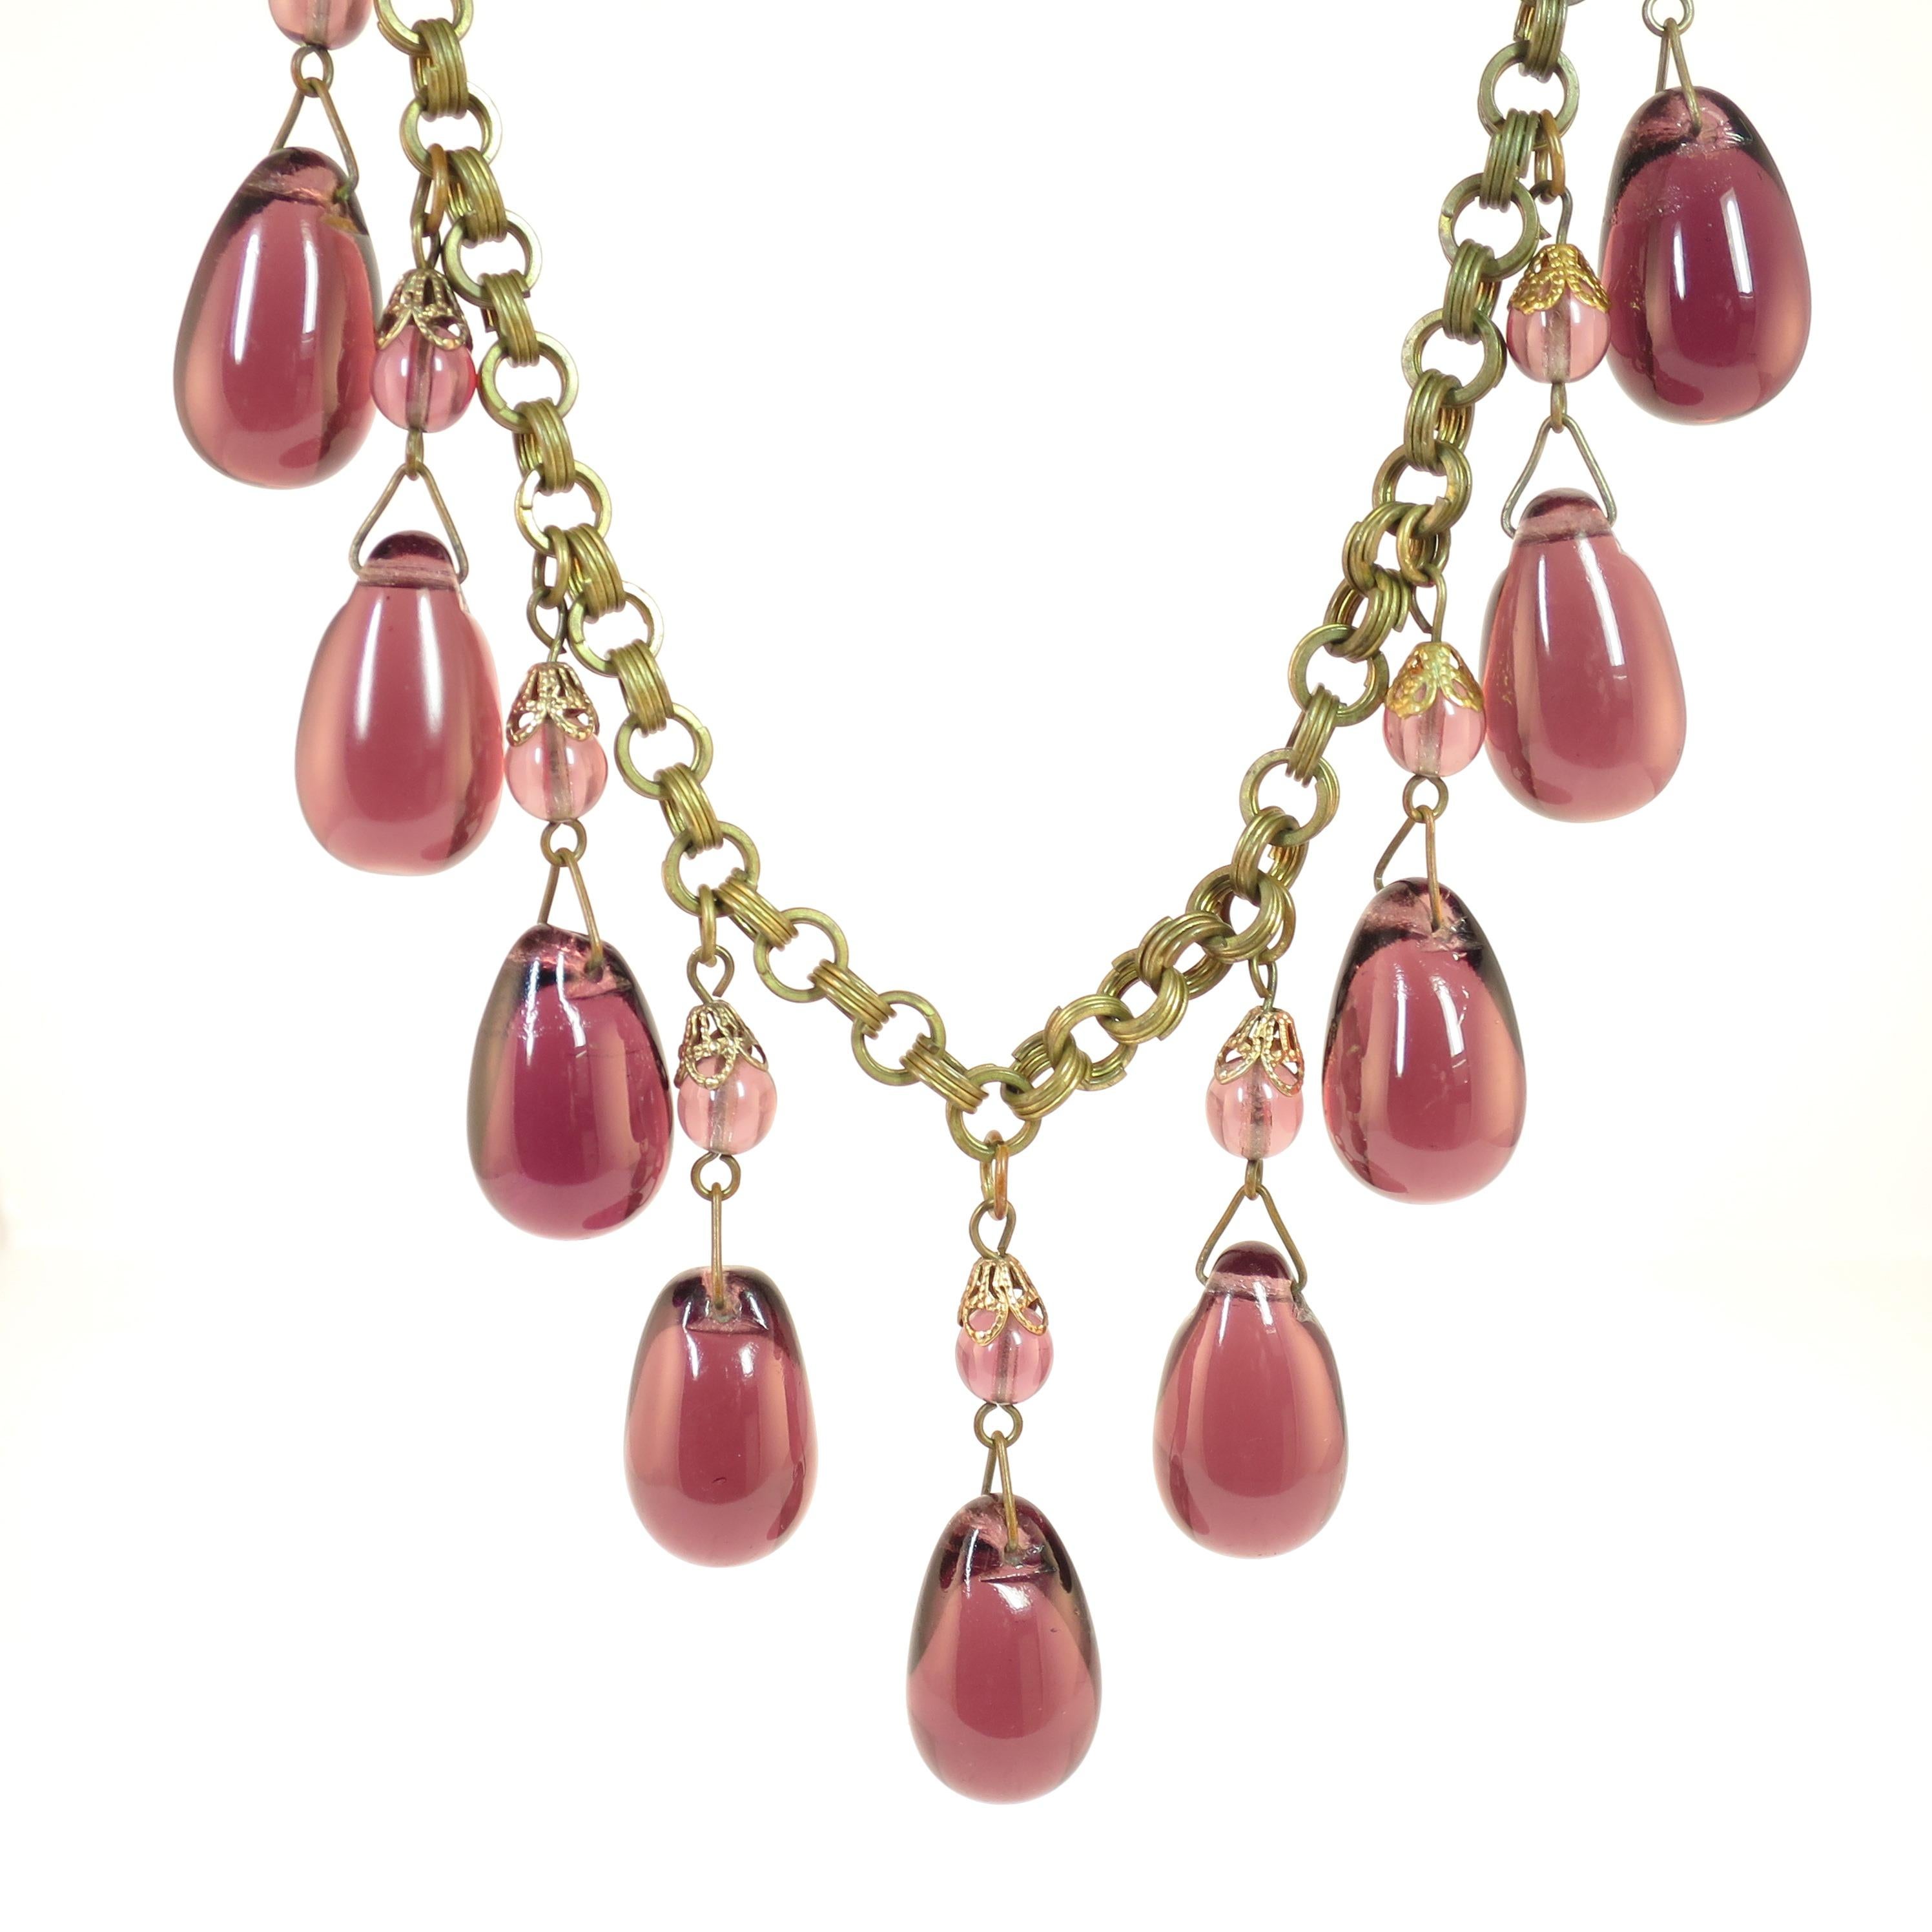 Victorian French Amethyst Poured Glass & Chain Link Necklace, 1870s For Sale 7